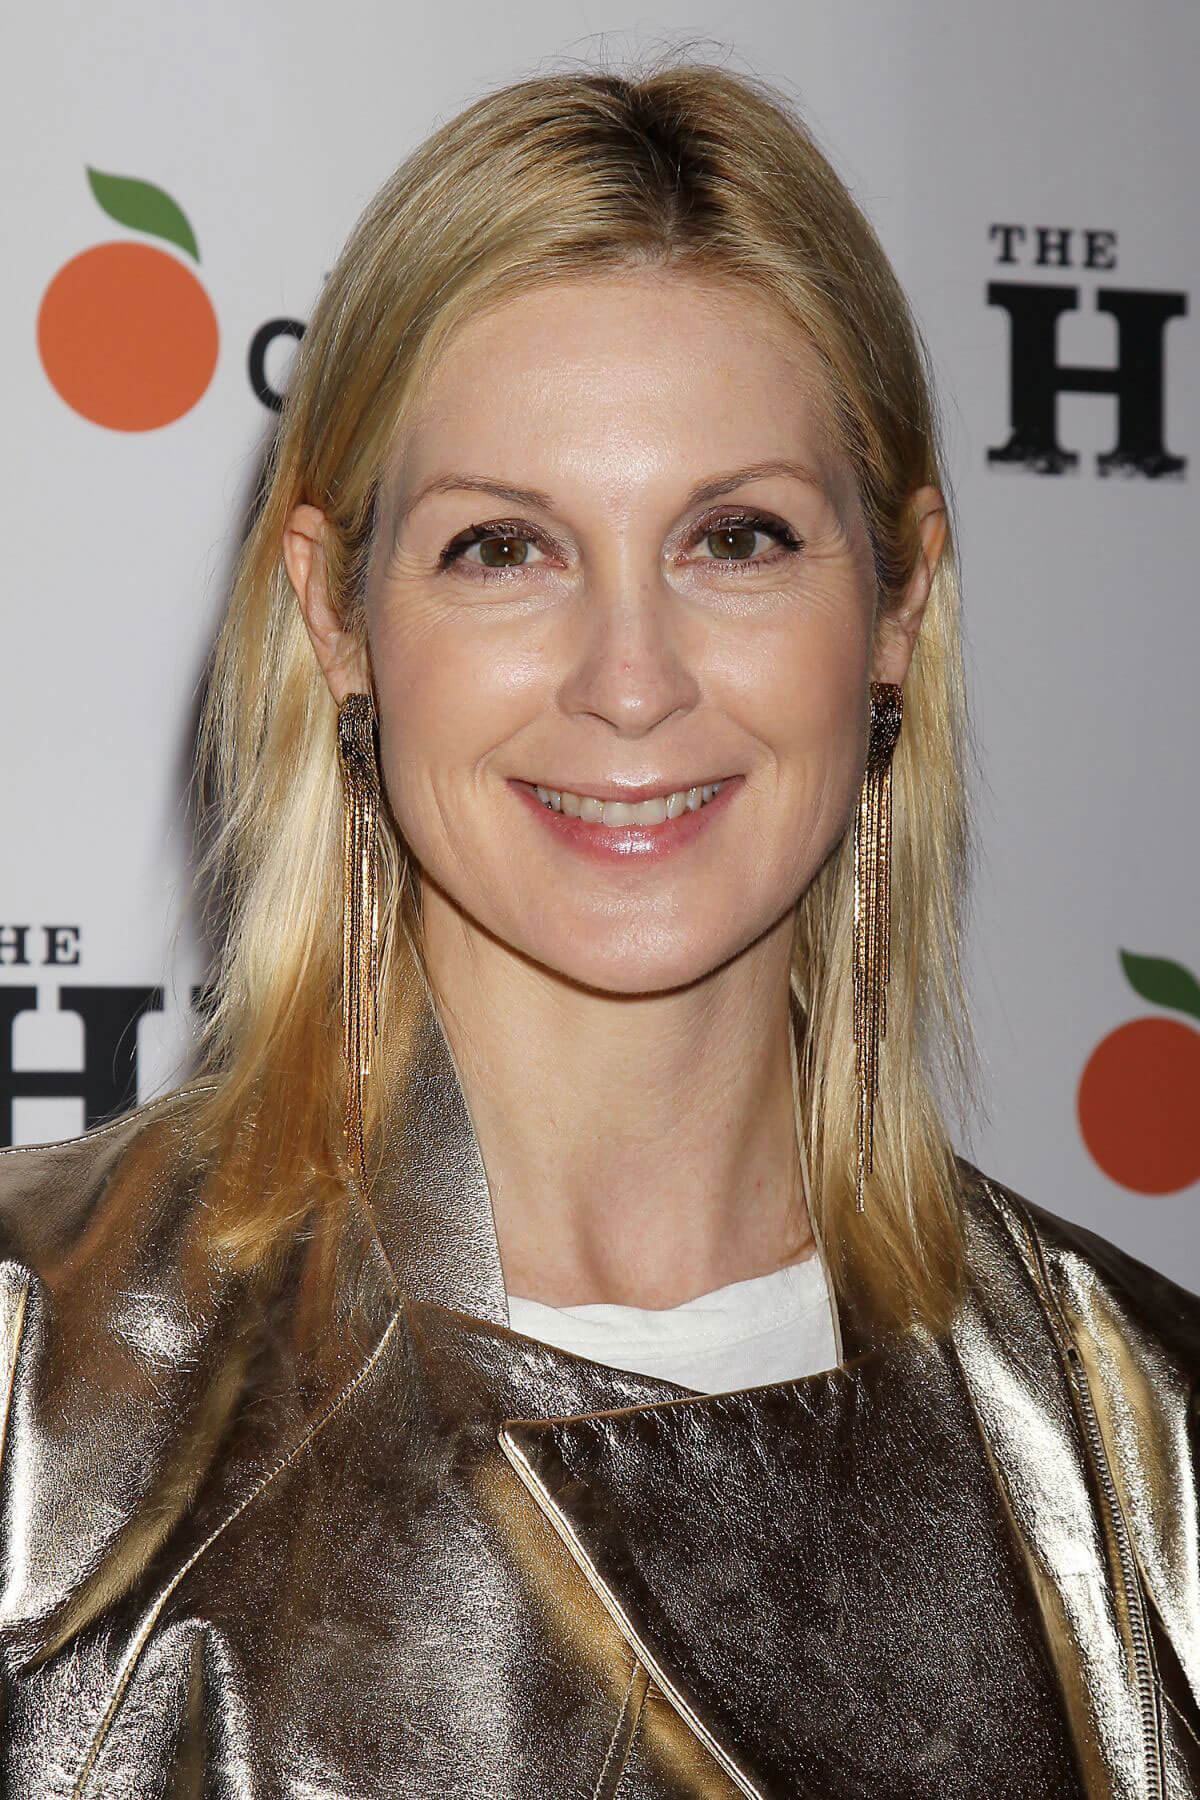 Kelly Rutherford at "The Hero" Special Screening in New York 5